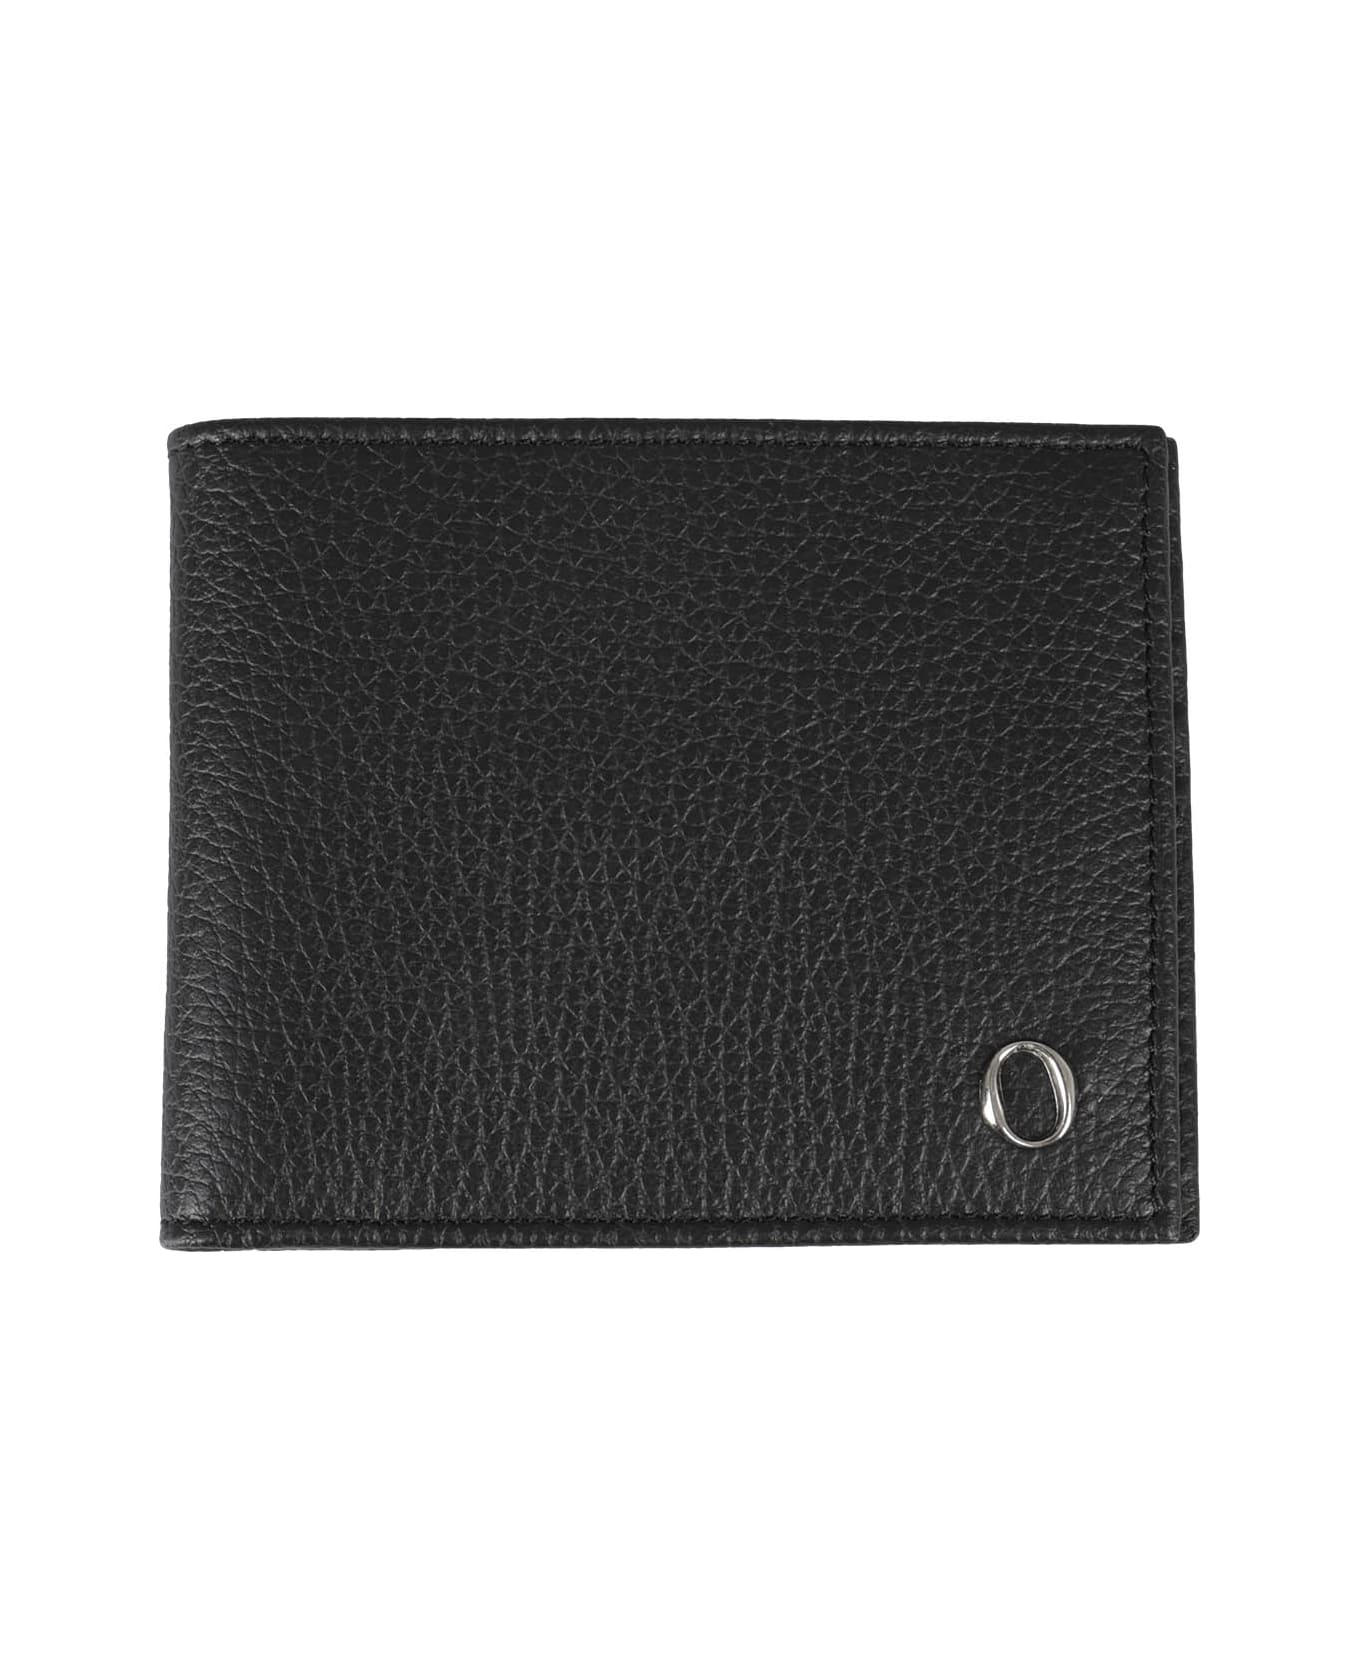 Orciani Leather Wallet - Ner Nero 財布